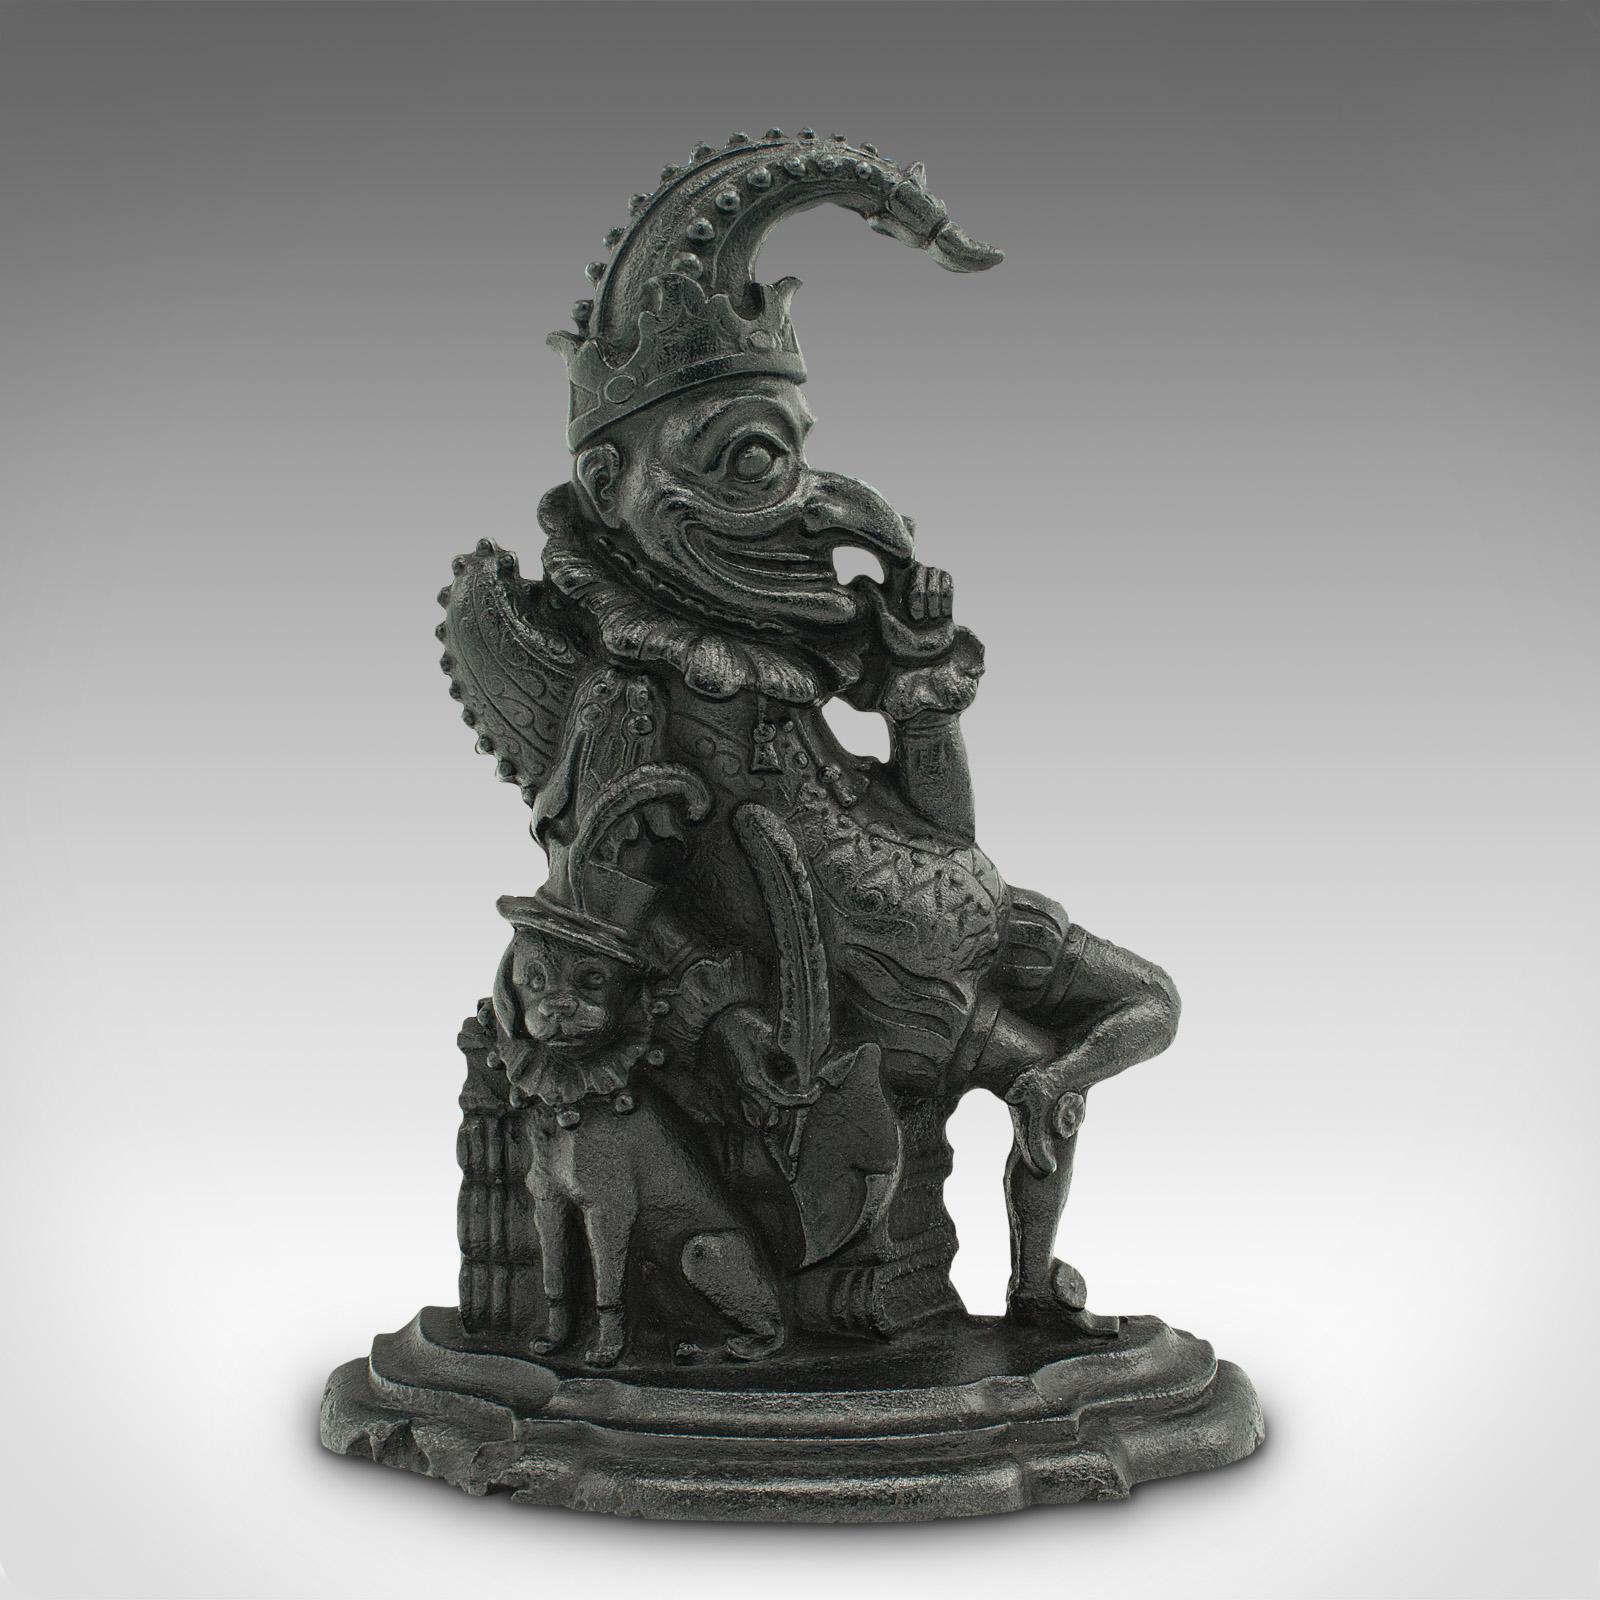 This is an antique Mr. Punch doorstop. An English, cast iron figurative door keeper, dating to the Victorian period, circa 1880.

Originating in the commedia dell'arte of 16th century Italy, Punchinello came to be known as Mr. Punch, his first